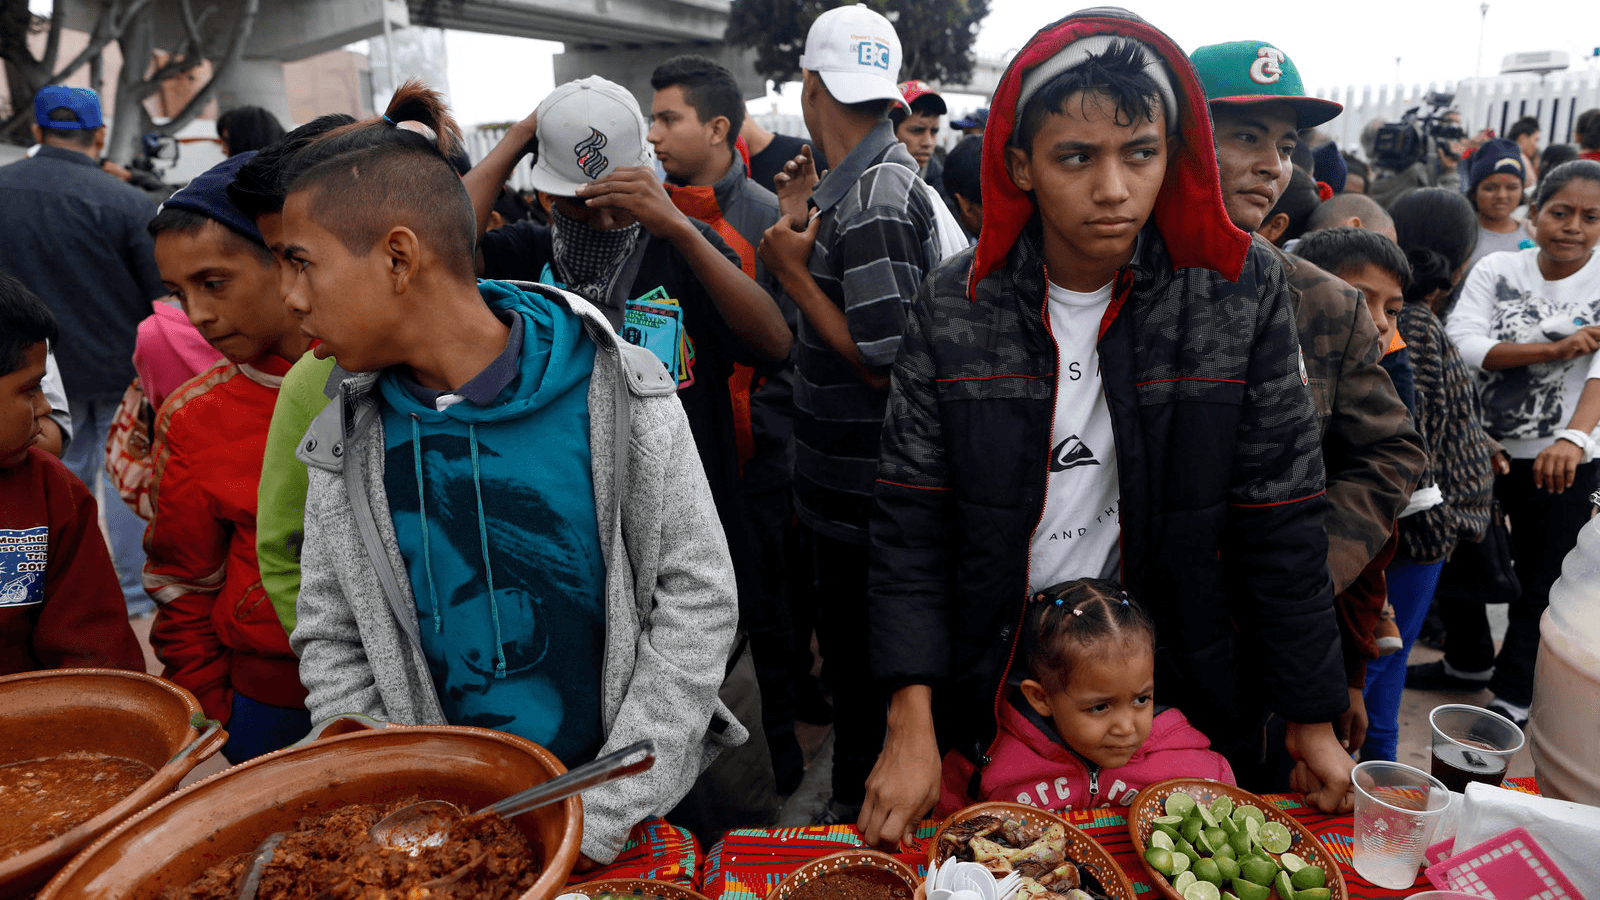 Members of a caravan of migrants from Central America line up to receive food near the San Ysidro checkpoint as the first fellow migrants entered US territory to seek asylum on Monday, in Tijuana, Mexico, April 30, 2018.